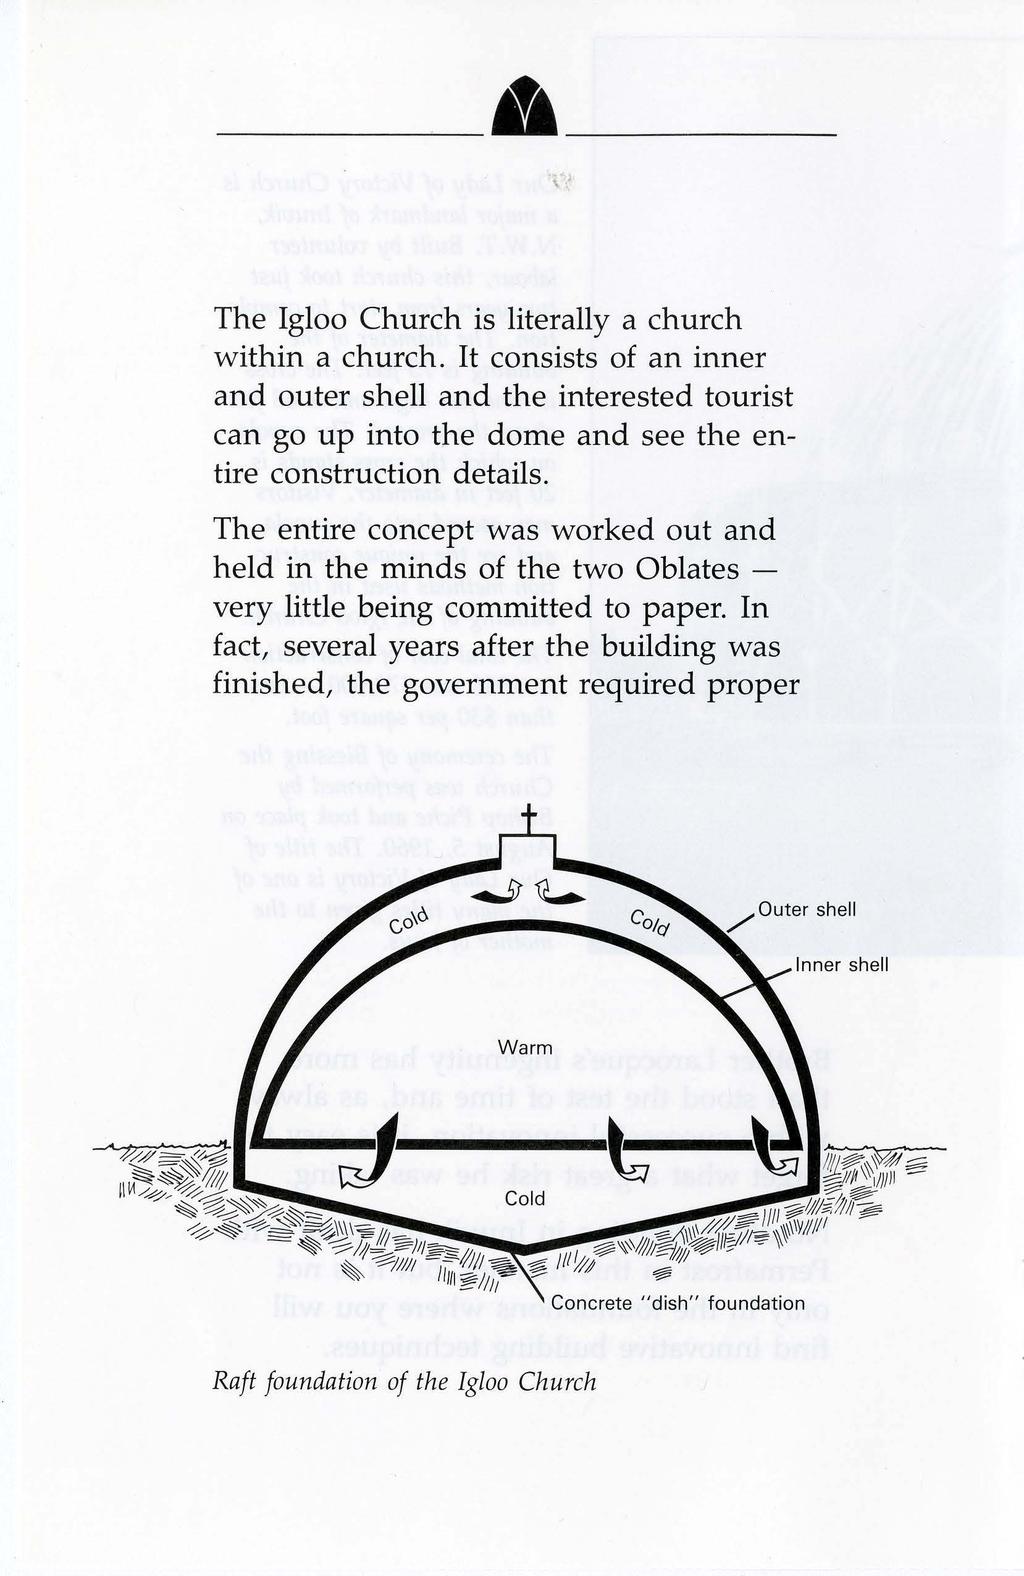 --~"--- The Igloo Church is literally a church within a church. It consists of an inner and outer shell and the interested tourist can go up into the dome and see the entire construction details.